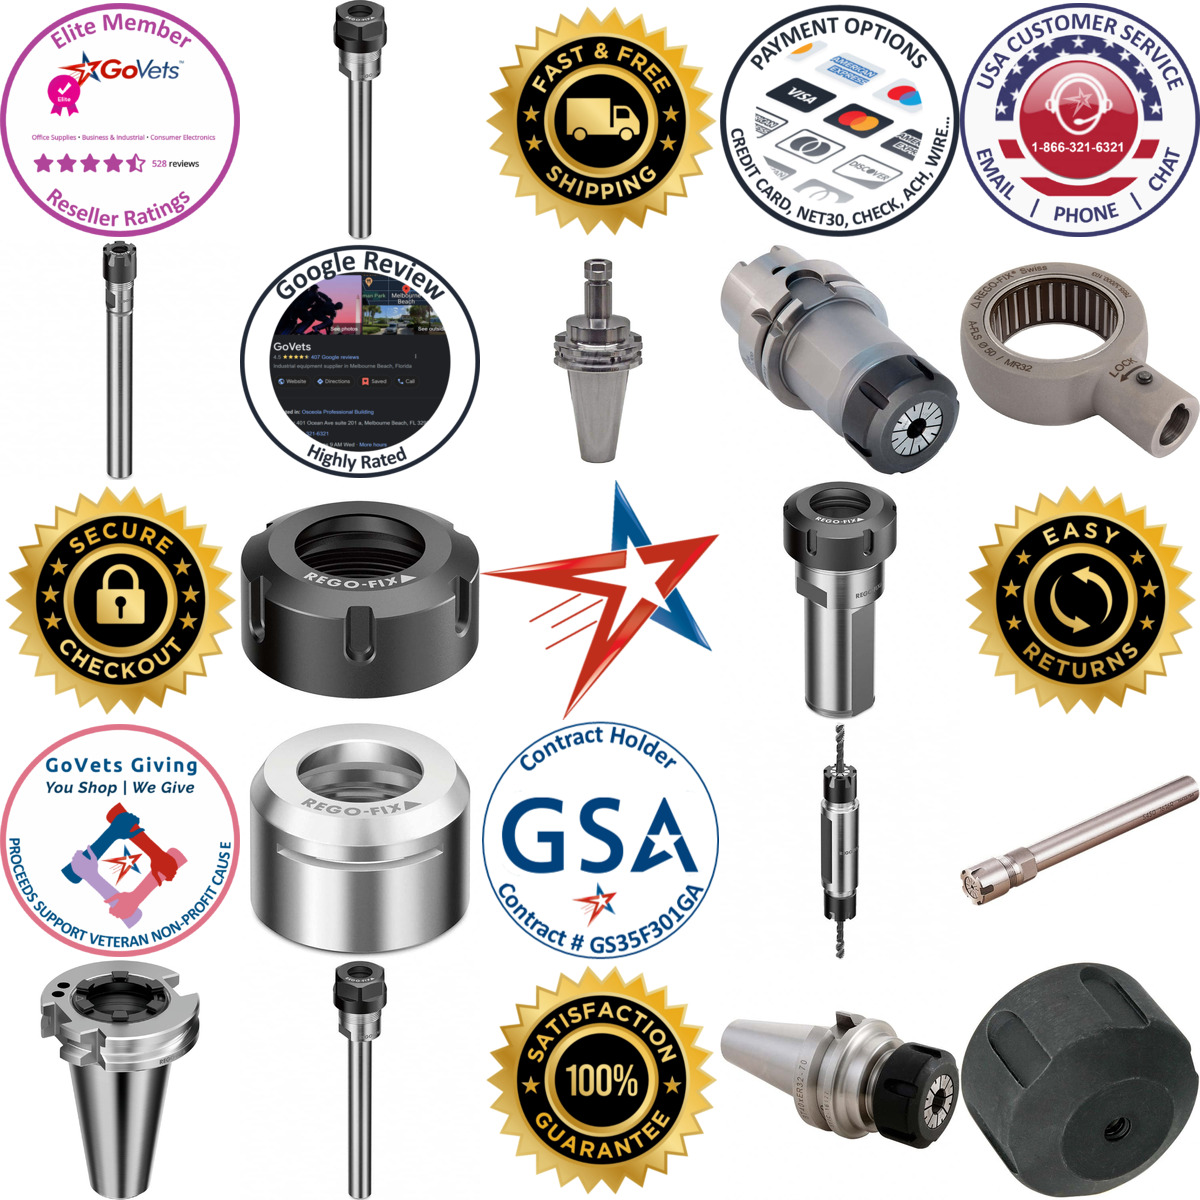 A selection of Collet Sets products on GoVets